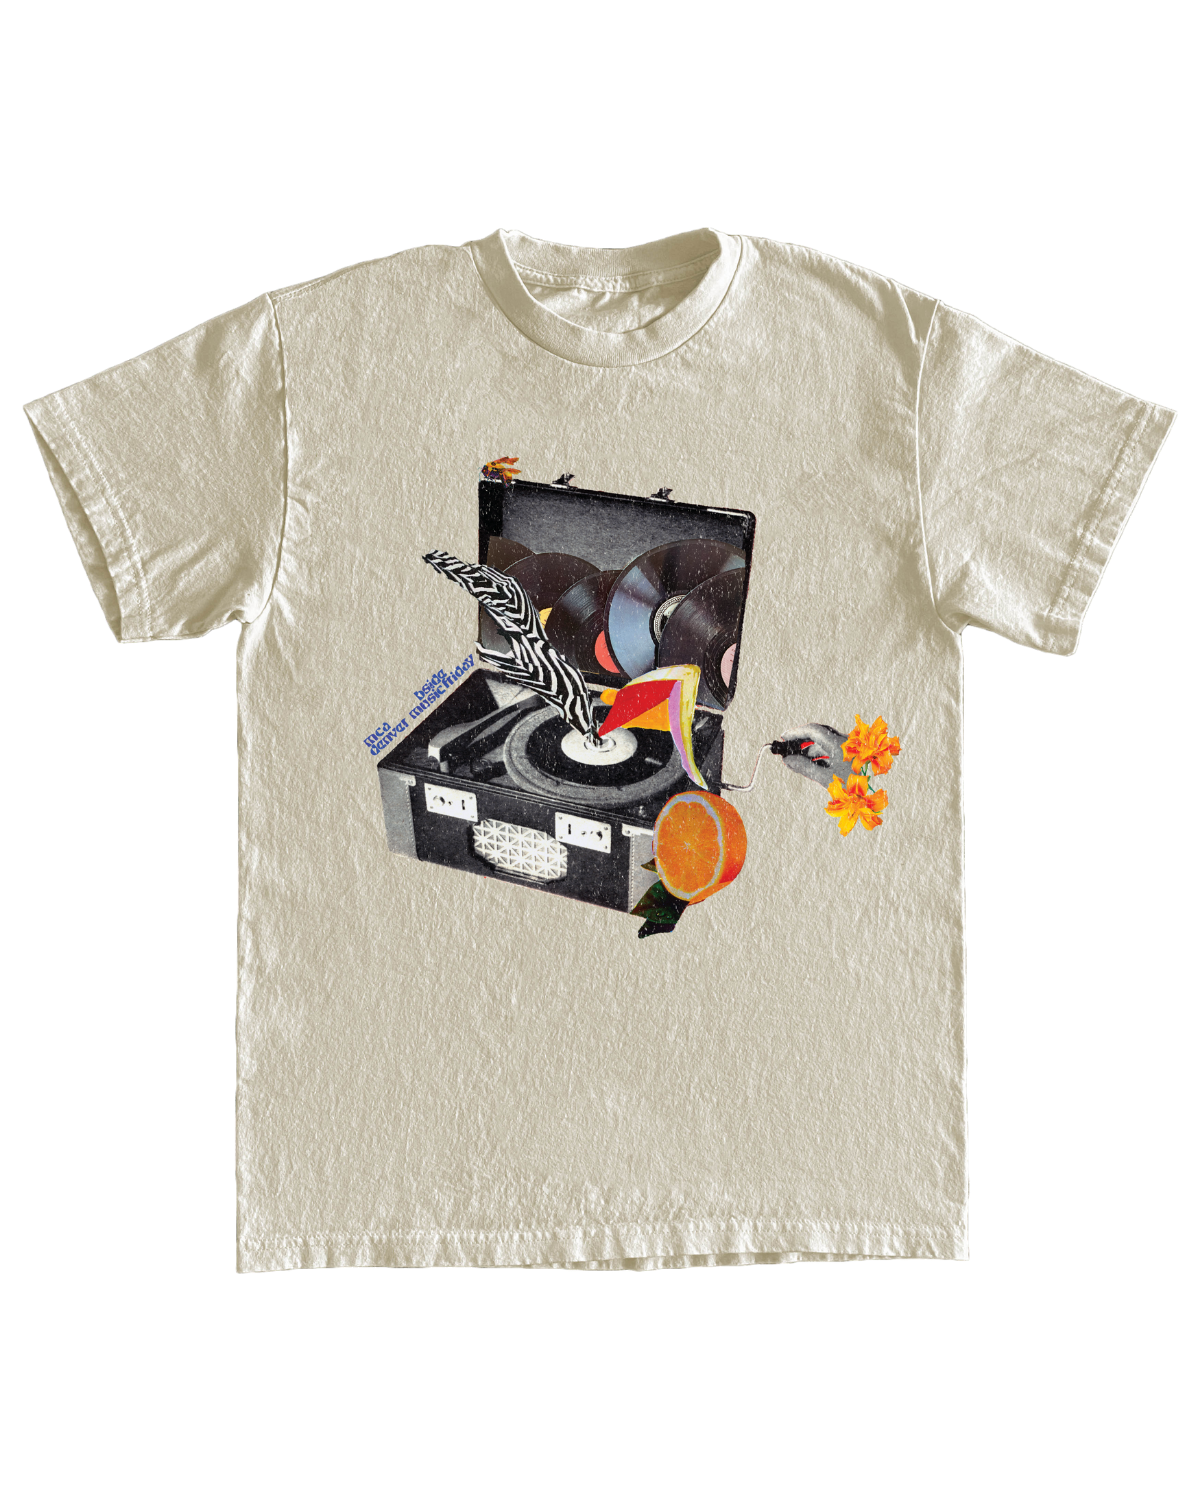 Cream-colored t-shirt laying flat on a white background. There is a fanciful collage on the t-shirt that features an open black and white record player that has one record playing and others stored in the lid. Colorful leg-like appendages are coming out of one of the records and an orange fruit is collaged on the bottom right corner of the record player. A disembodied hand is holding a lever attached to the record player that presumably turns the player on.